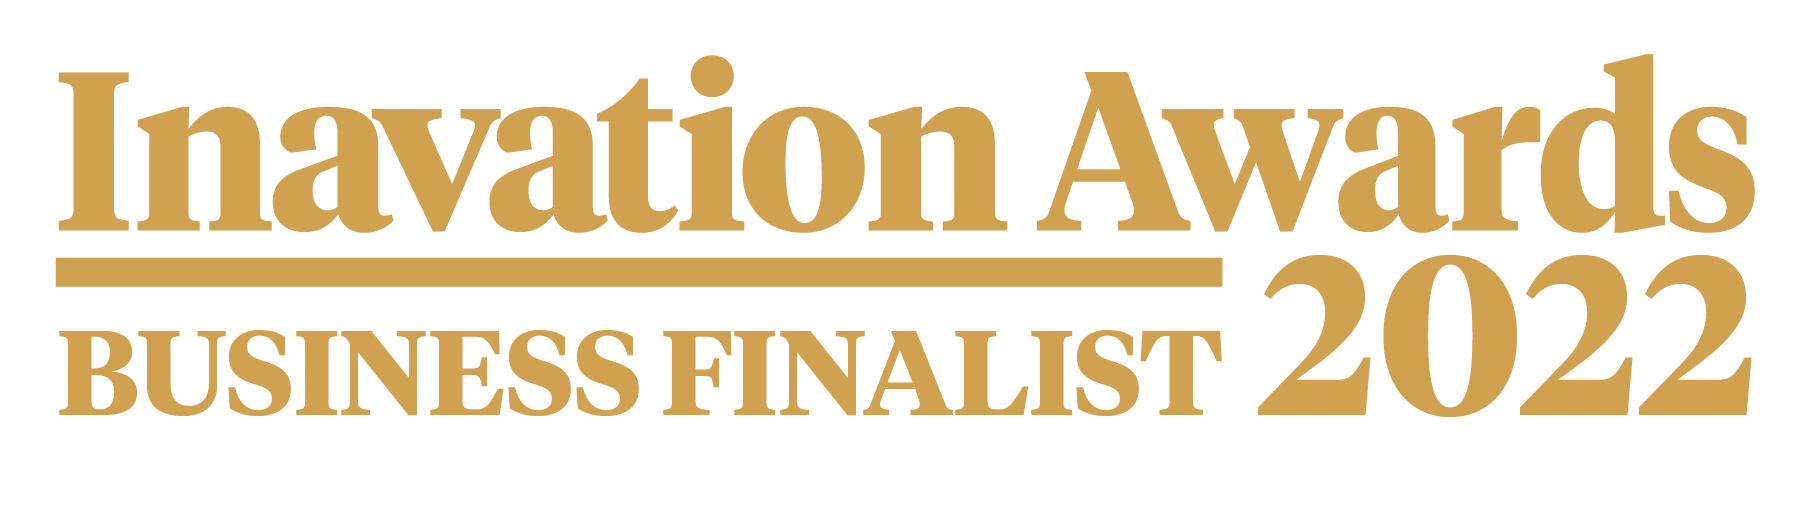 nsign.tv, finalist in the 'Inavate Awards' for its facial recognition project in the Retail field